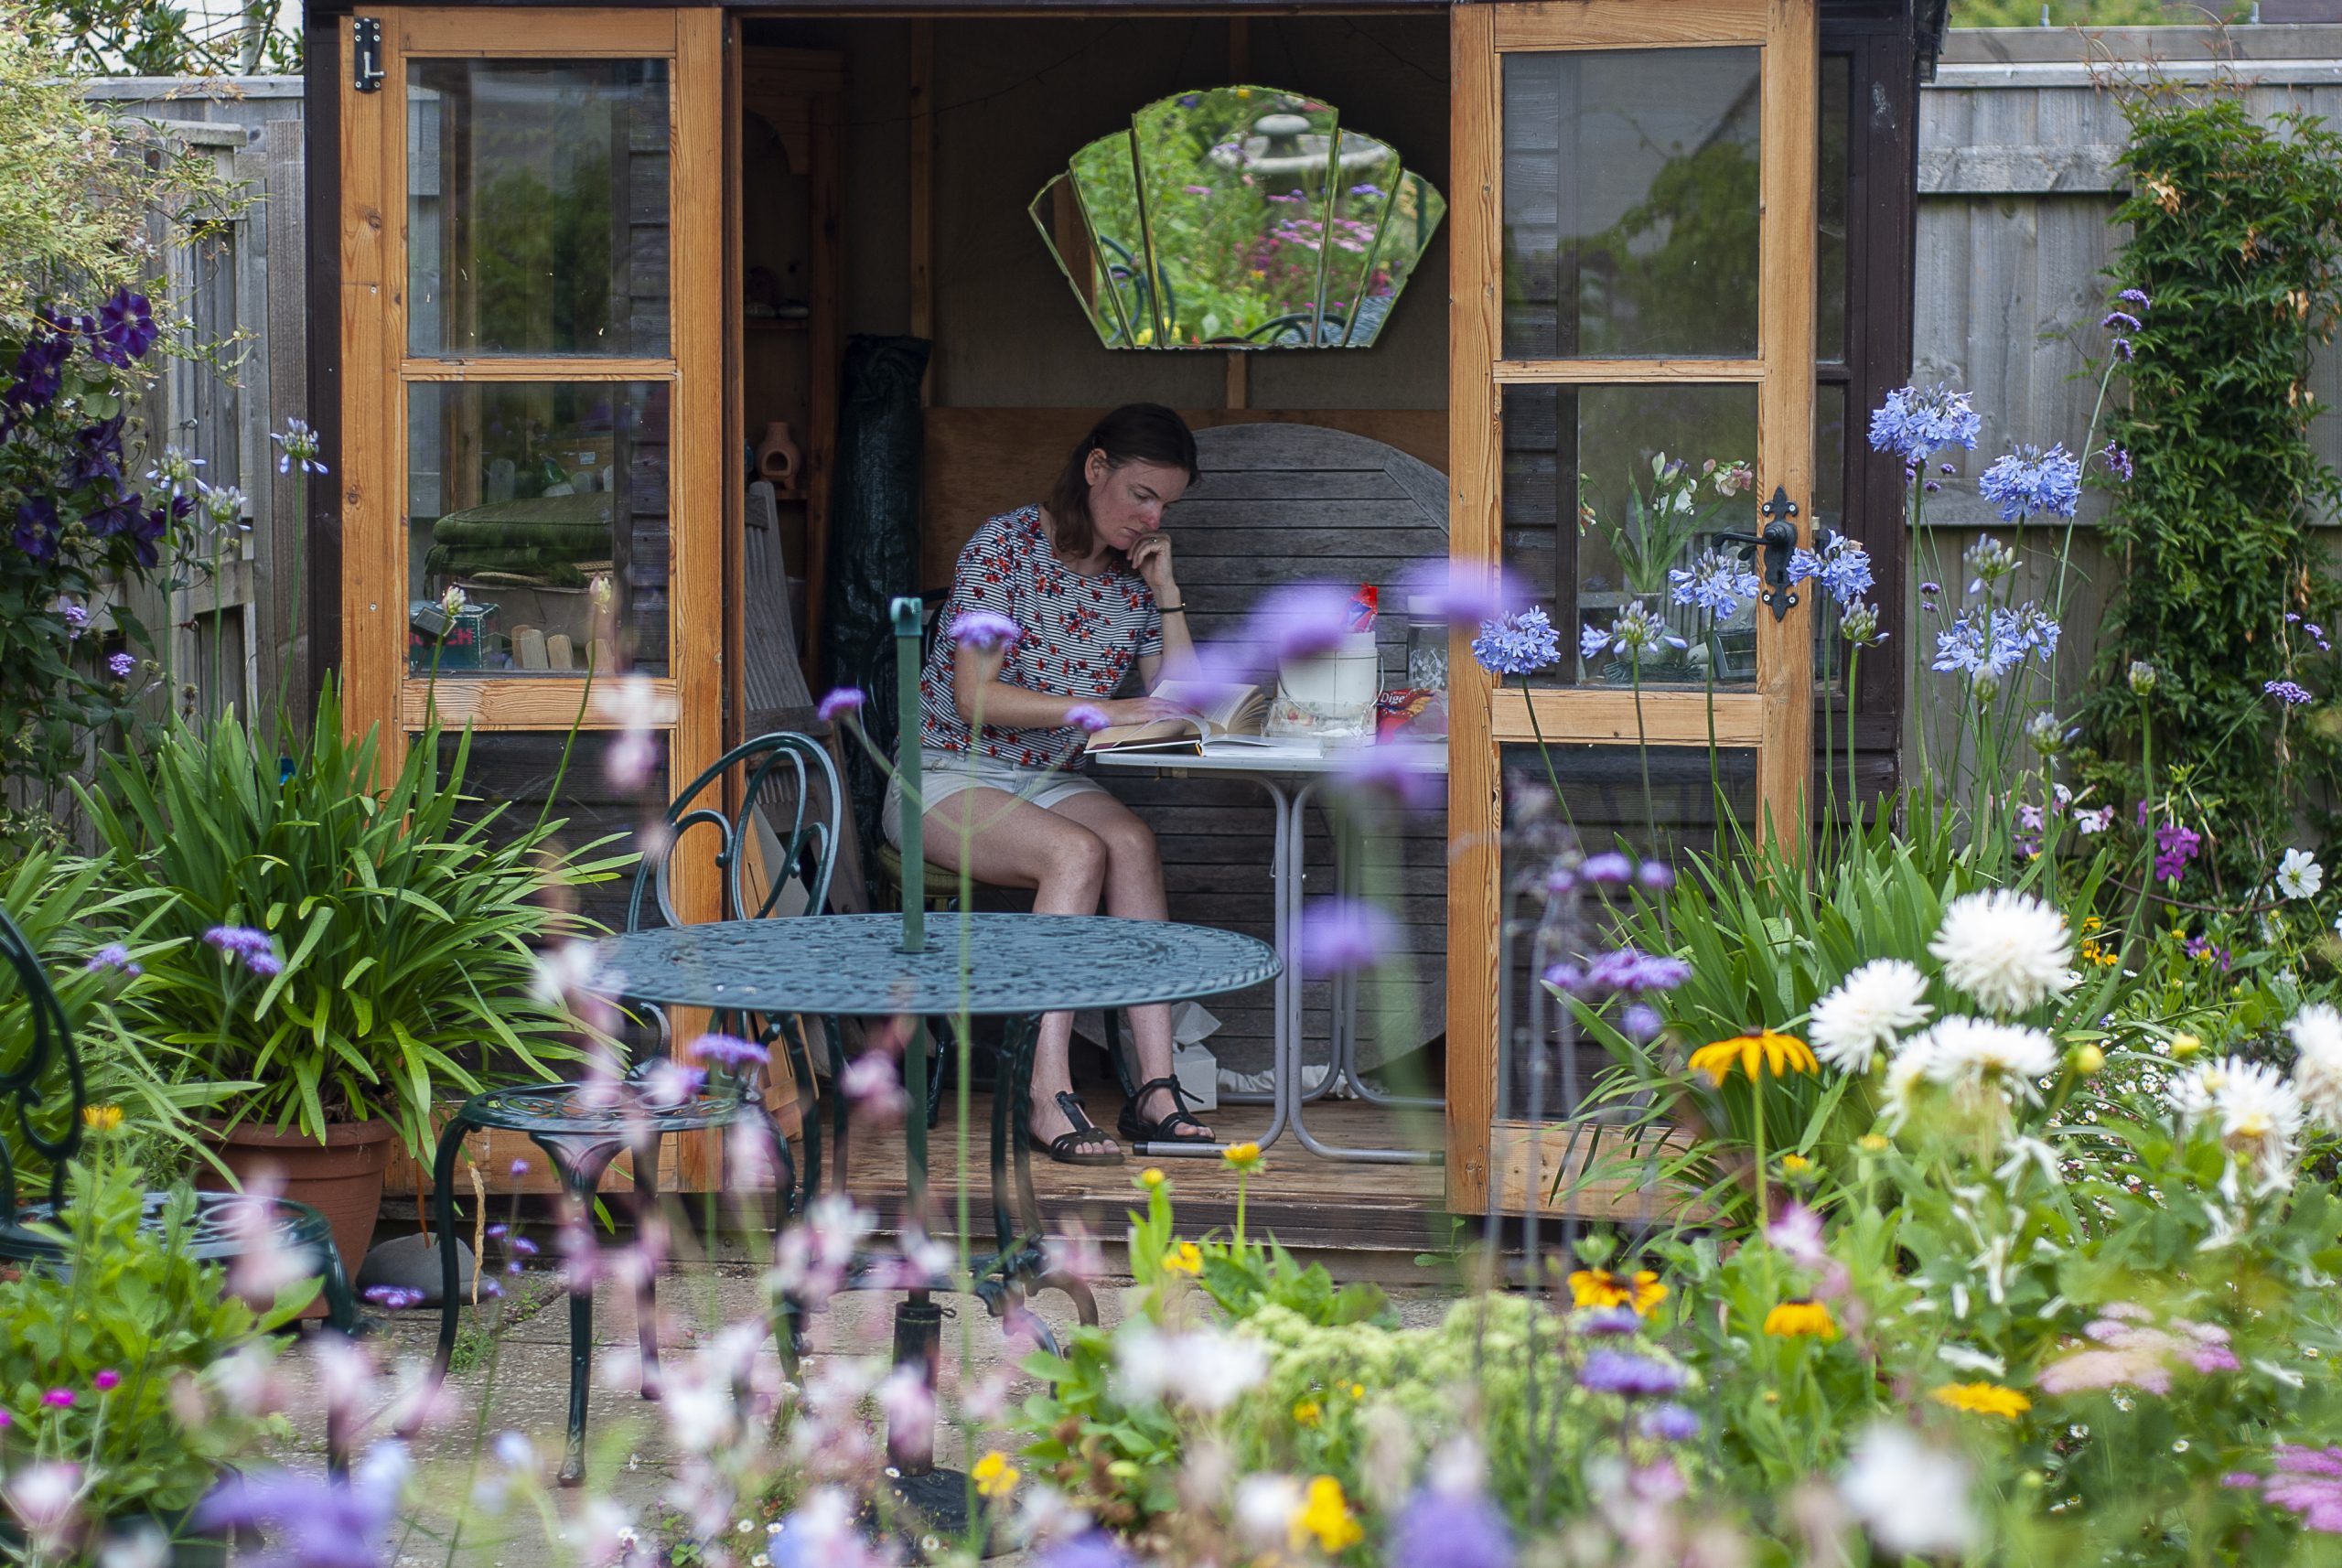 A woman reading in a summer house with garden flowers in the foreground